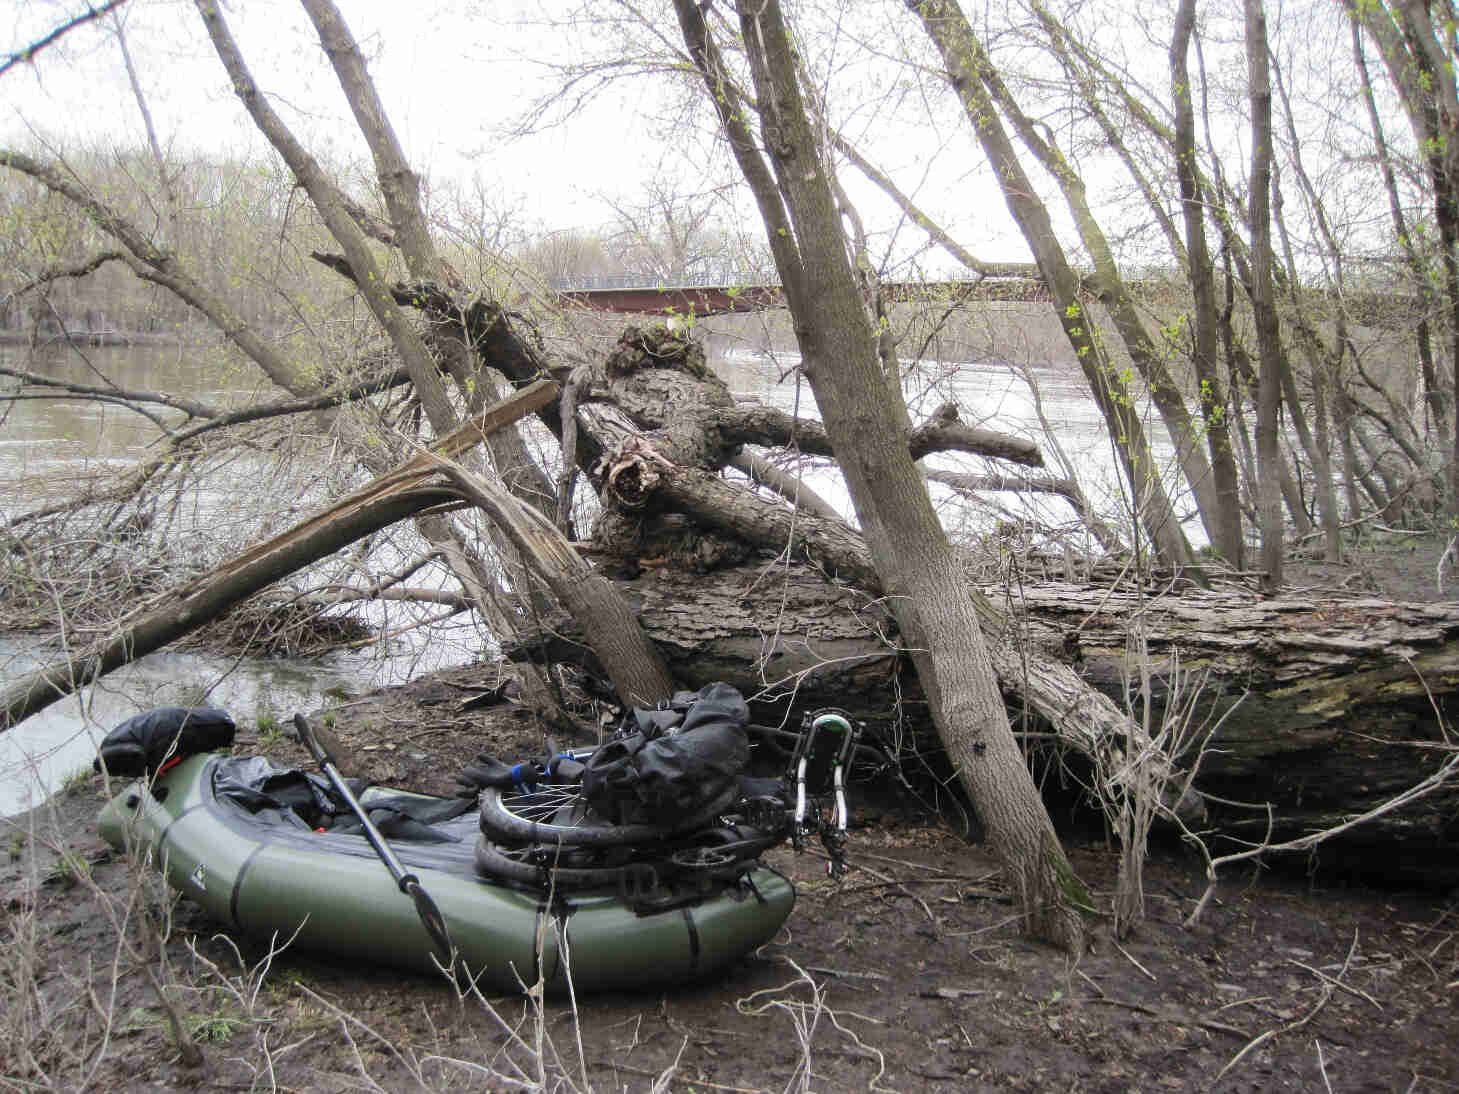 An olive green inflatable raft with a disassembled bike on top, on a dirt river bank in the bare woods